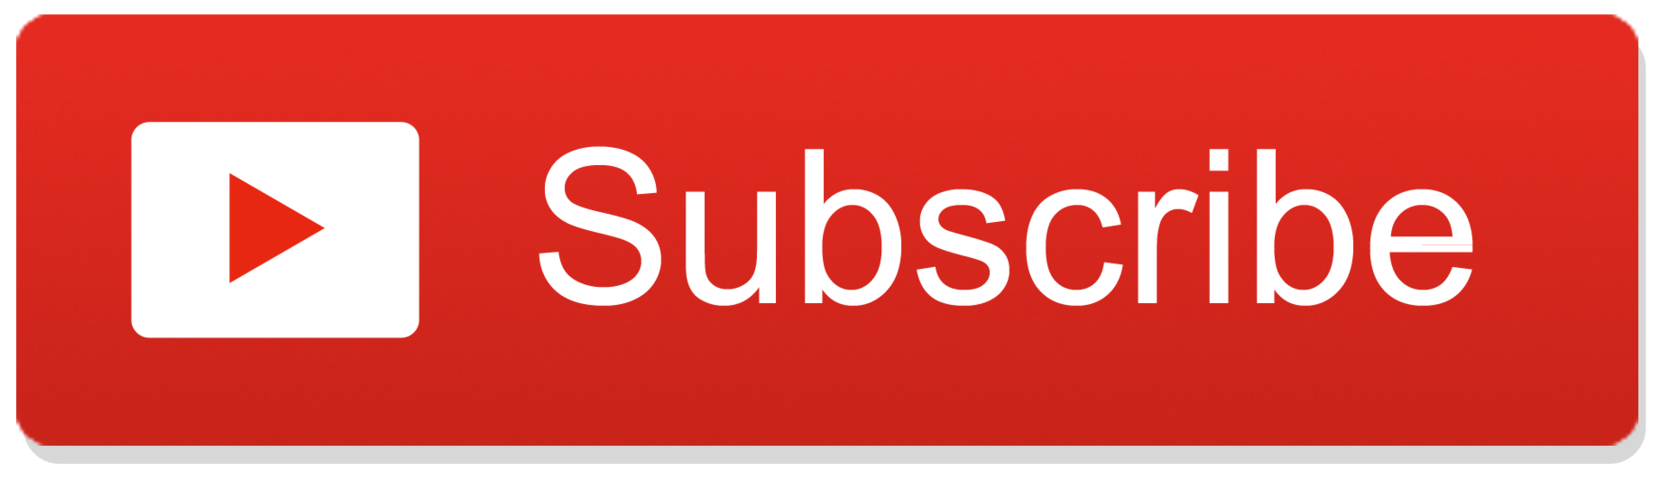 Youtube Subscribe Button  2014  By Just Browsiing On Deviantart